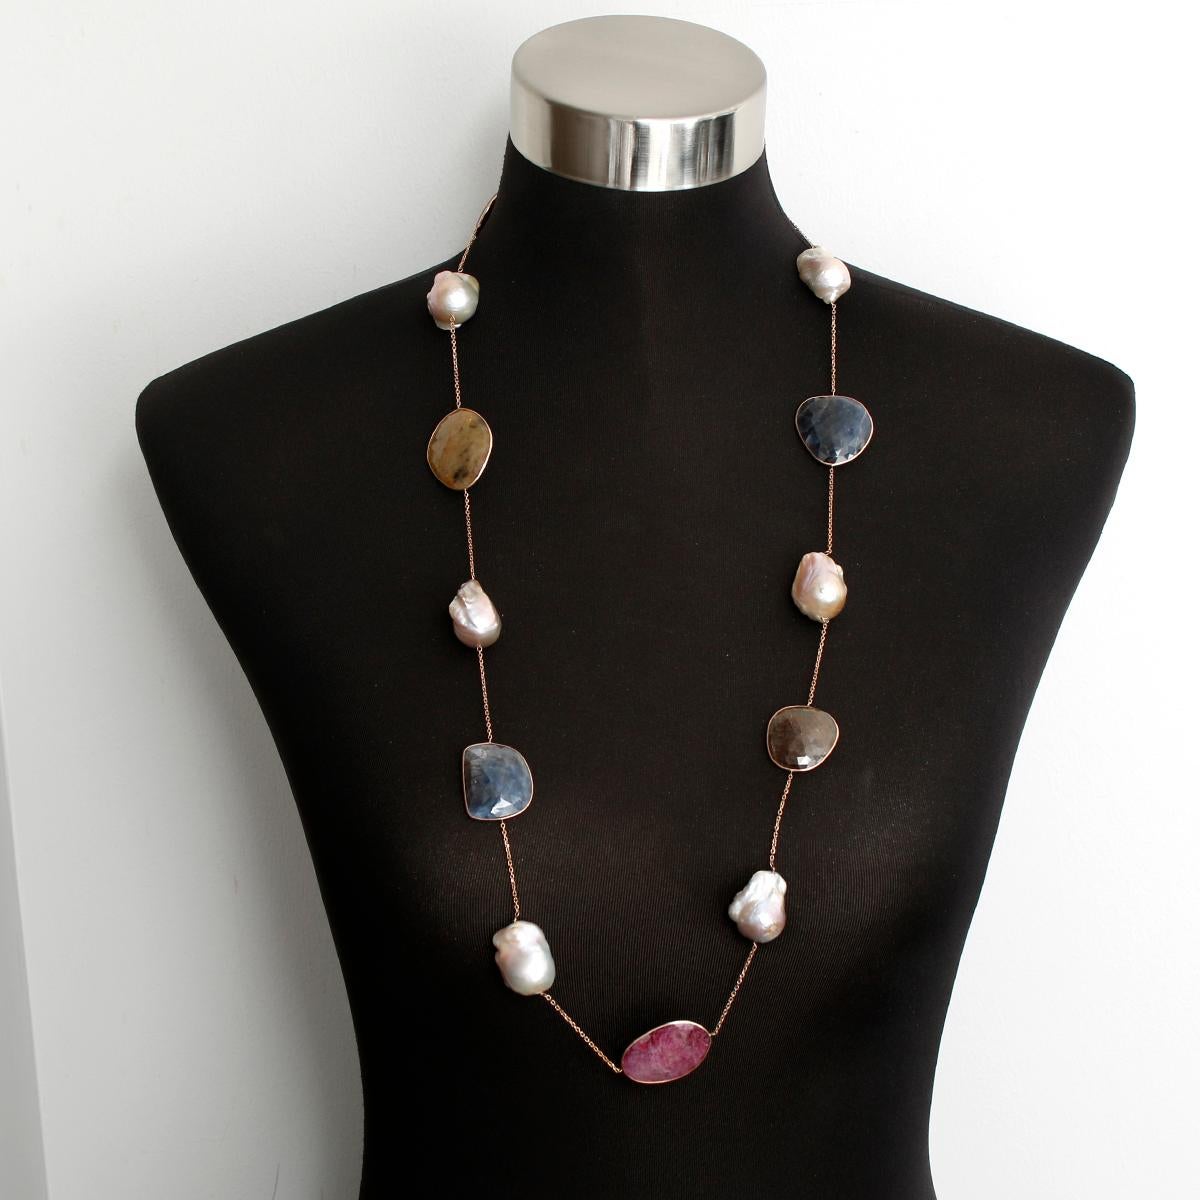 Women's Beautiful Rose Gold Necklace with Multicolored Sapphire Slices and Large Pearls For Sale